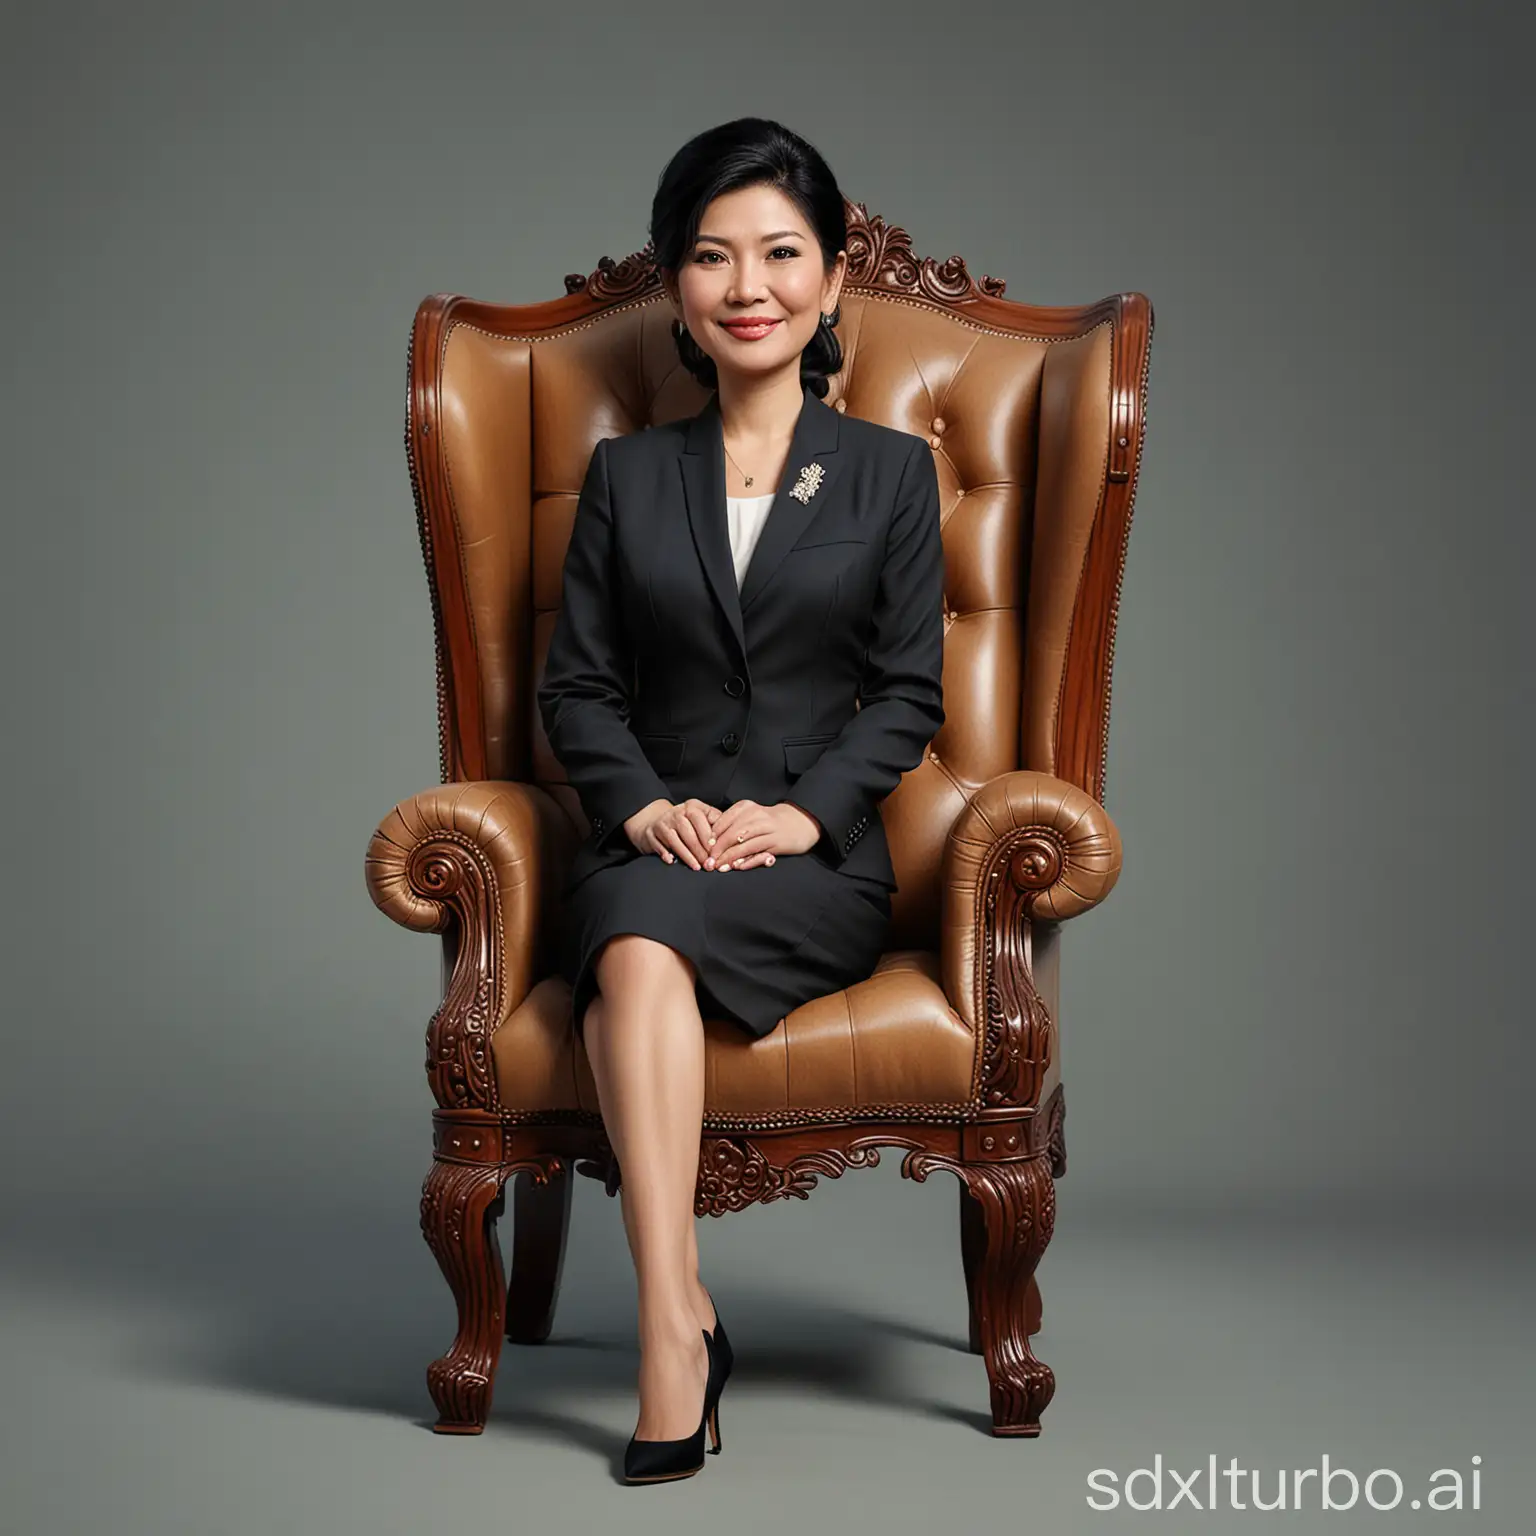 Create a Caricature 3D Realistic Cartoon art style full body with a big head. 'Yingluck Shinawatra". A 45 year old woman, is sitting relaxed in a classic black color wingback wooden chair, the wood texture is clear. Thai prime minister's clothes. Sit with your right leg close to your left leg, The right hand holds the baton of the Thai prime minister. your left hand placed on the edge of the chair. The background should contrast with the color of the chair and clothing,enhancing the overall composition of the picture. Use soft photography lighting, dramatic overhead lighting, very high image quality, clear character details, UHD, 16k.